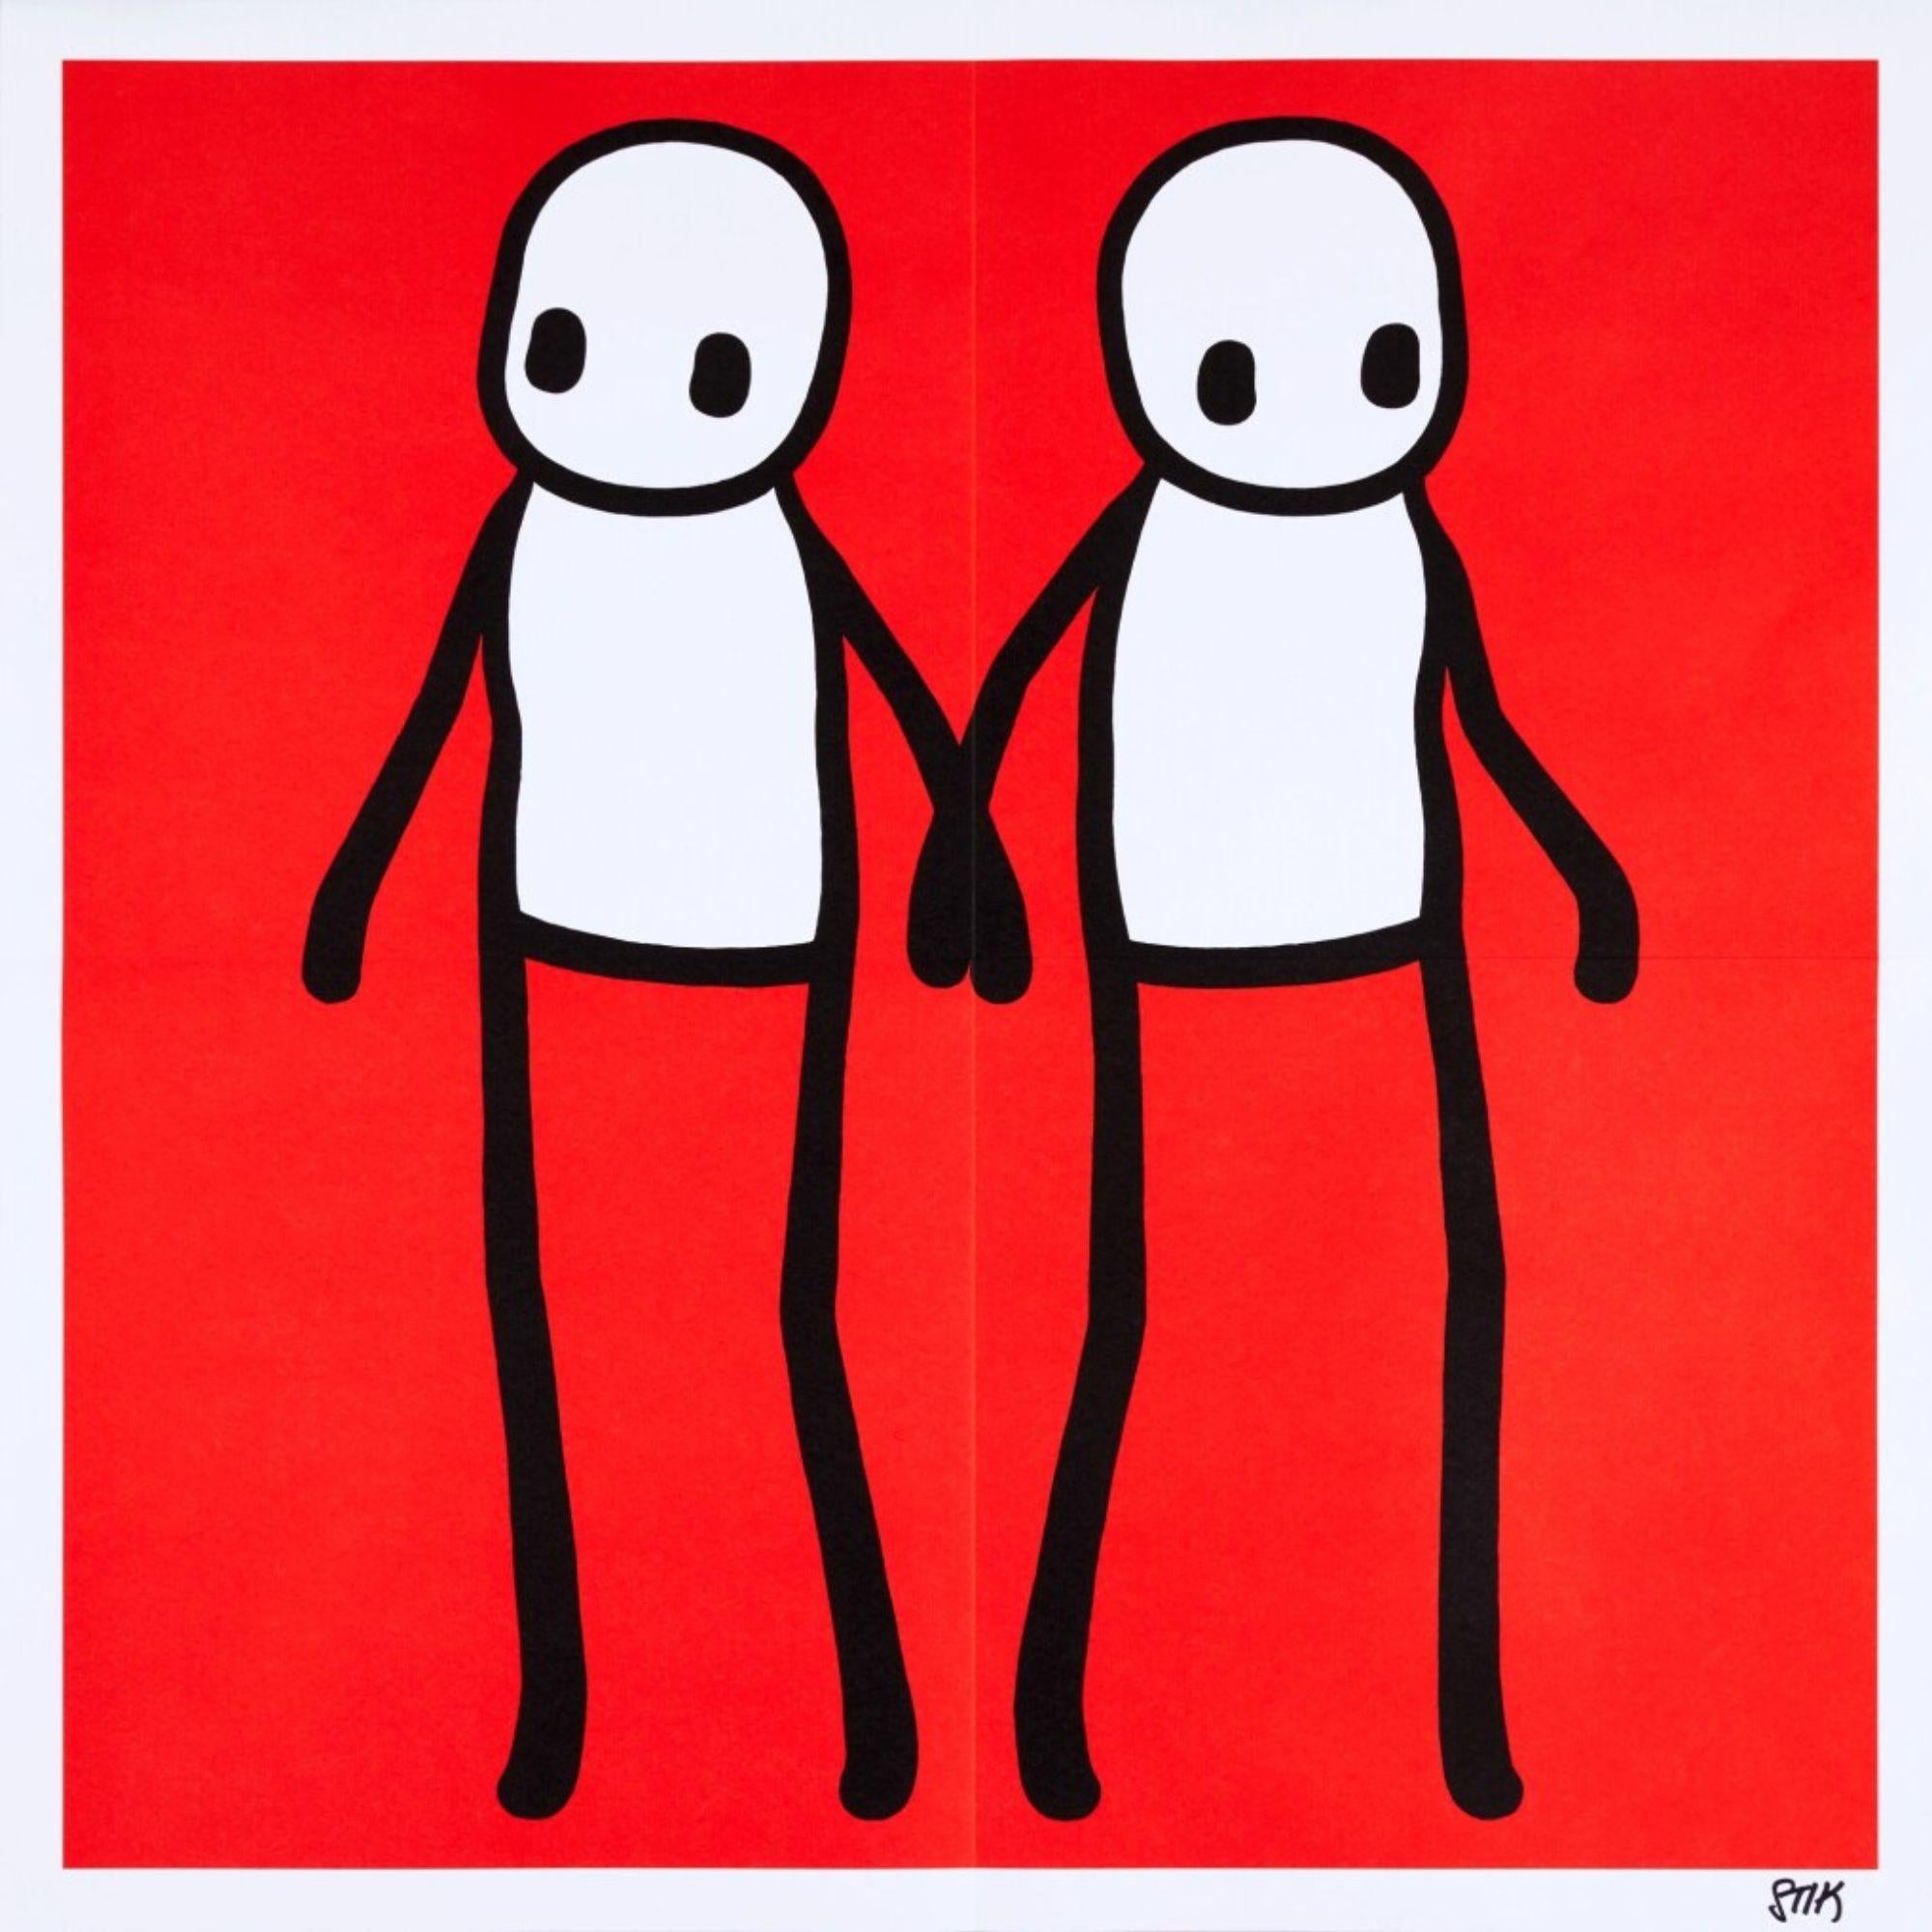 Holding Hands Red (Signed) - Print by Stik